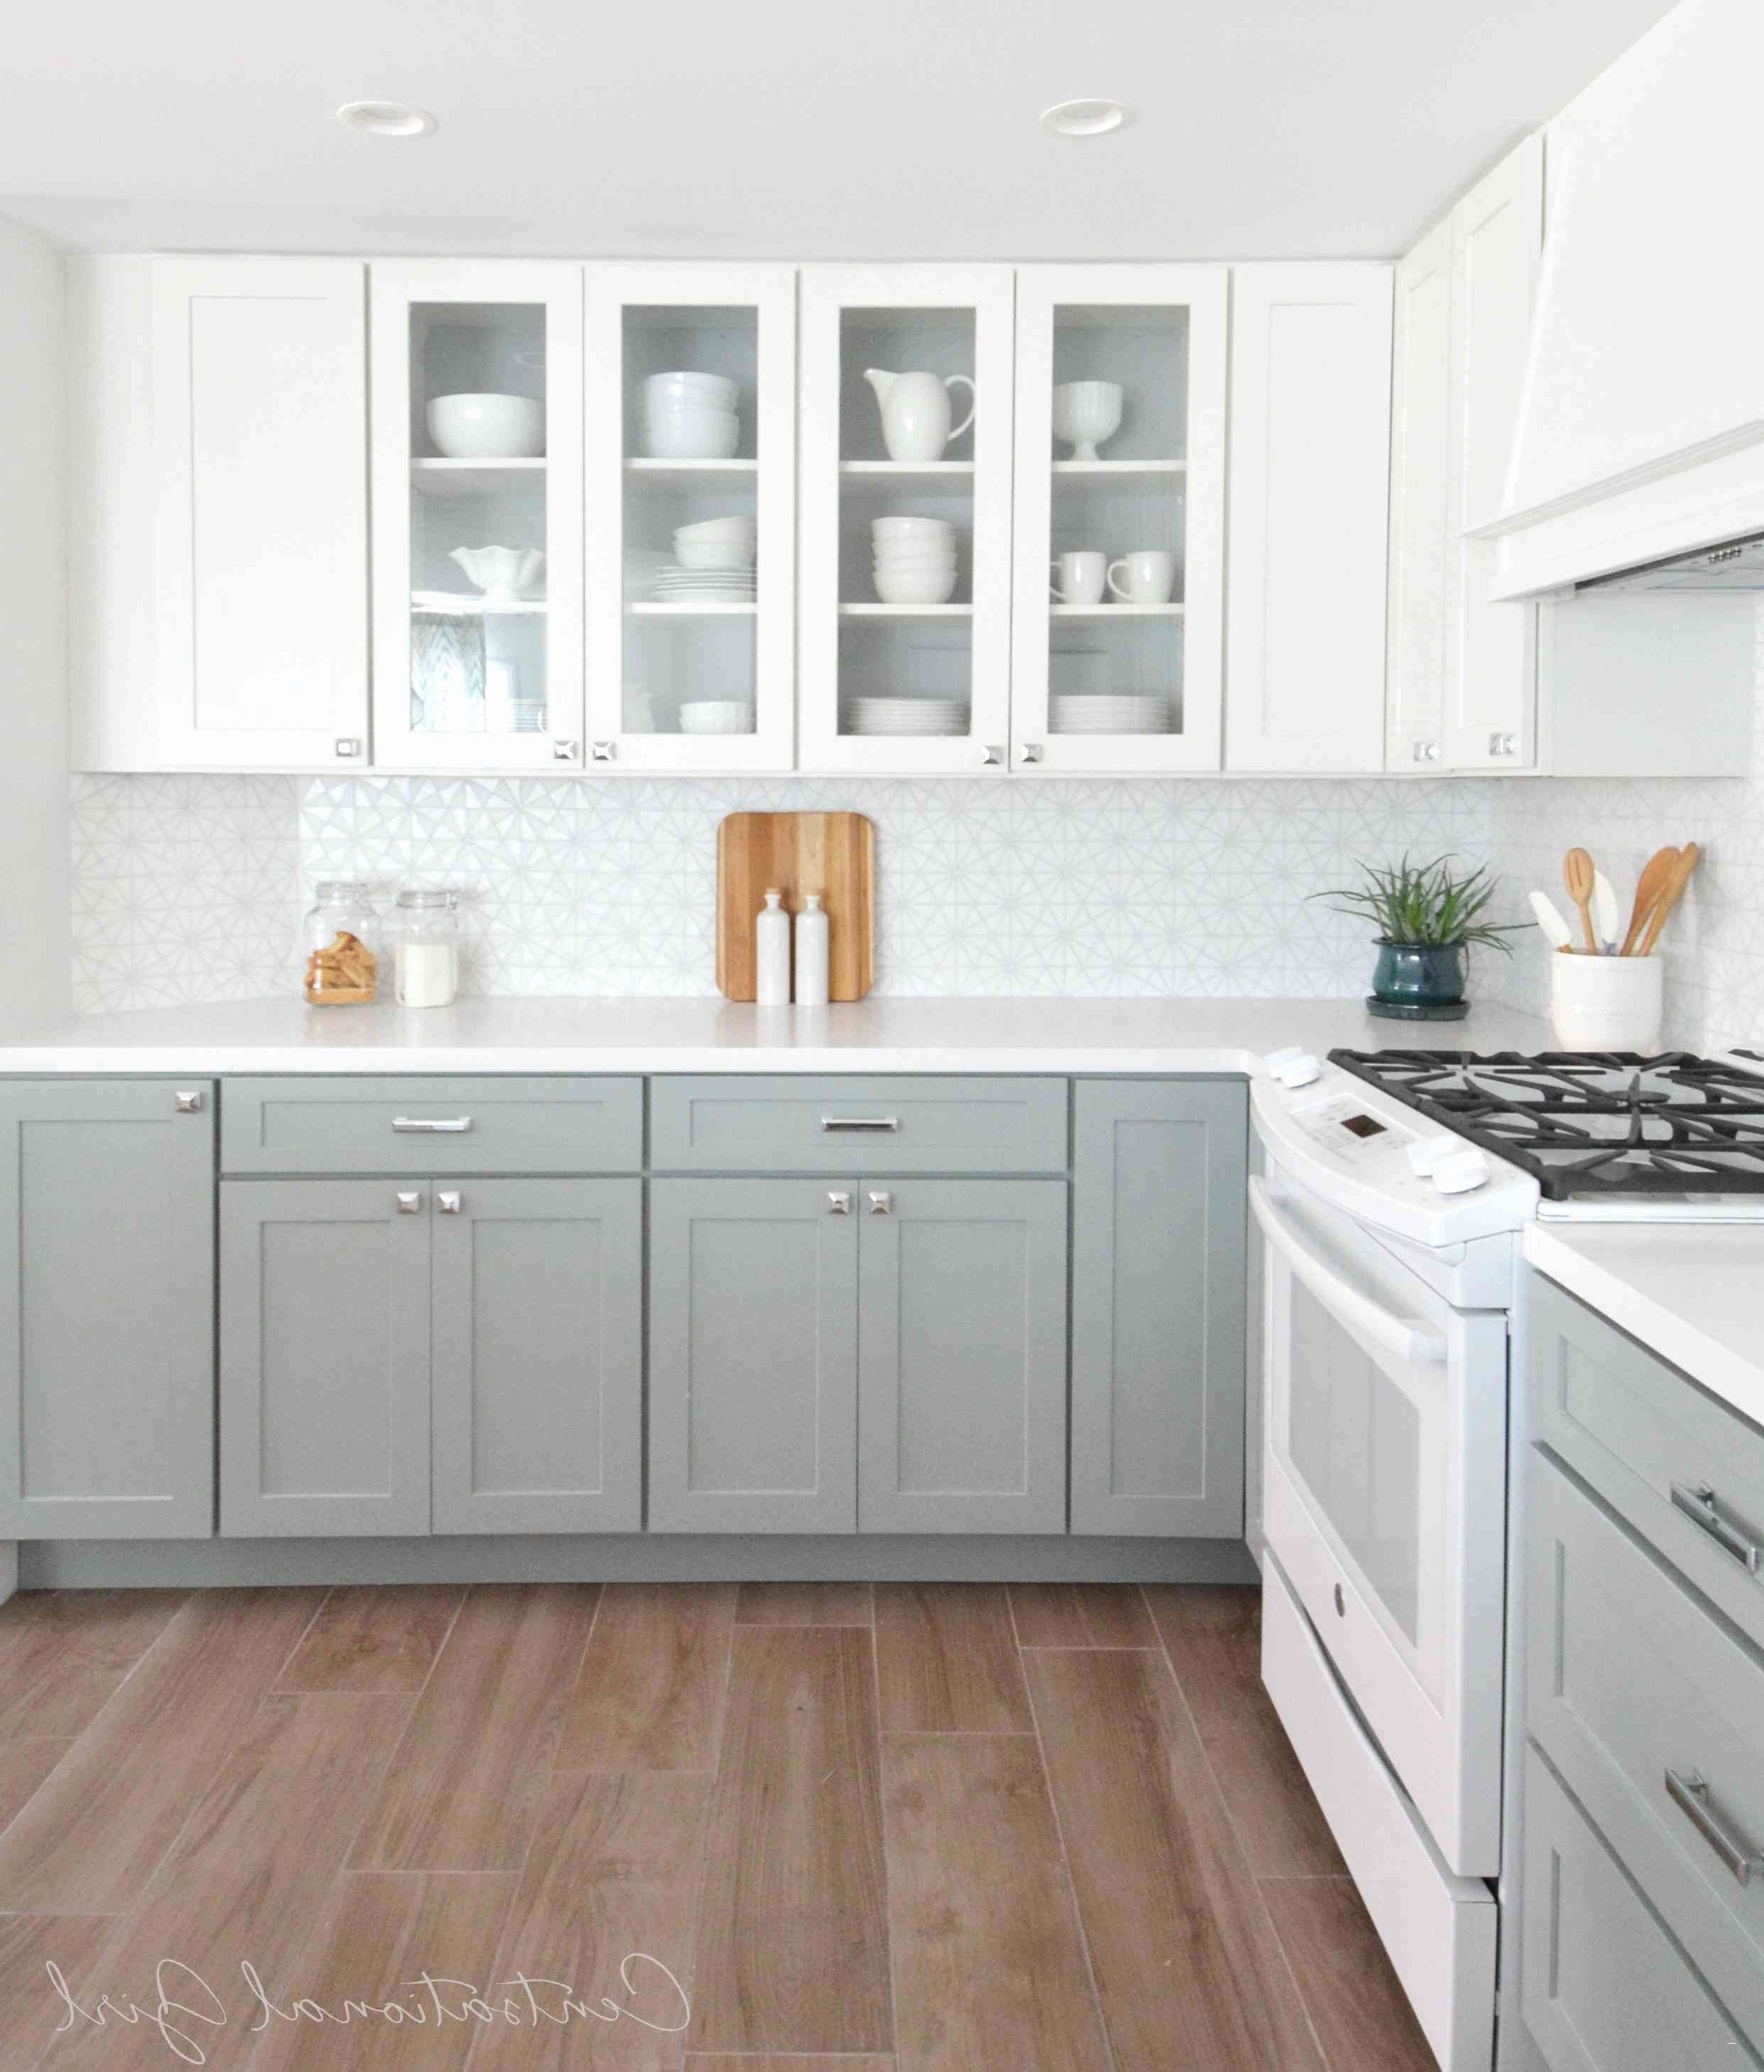 26 Awesome What Color Hardwood Floor with White Cabinets 2024 free download what color hardwood floor with white cabinets of kitchen colors with white cabinets beautiful hinges for kitchen throughout kitchen colors with white cabinets best of amazing white and grey 